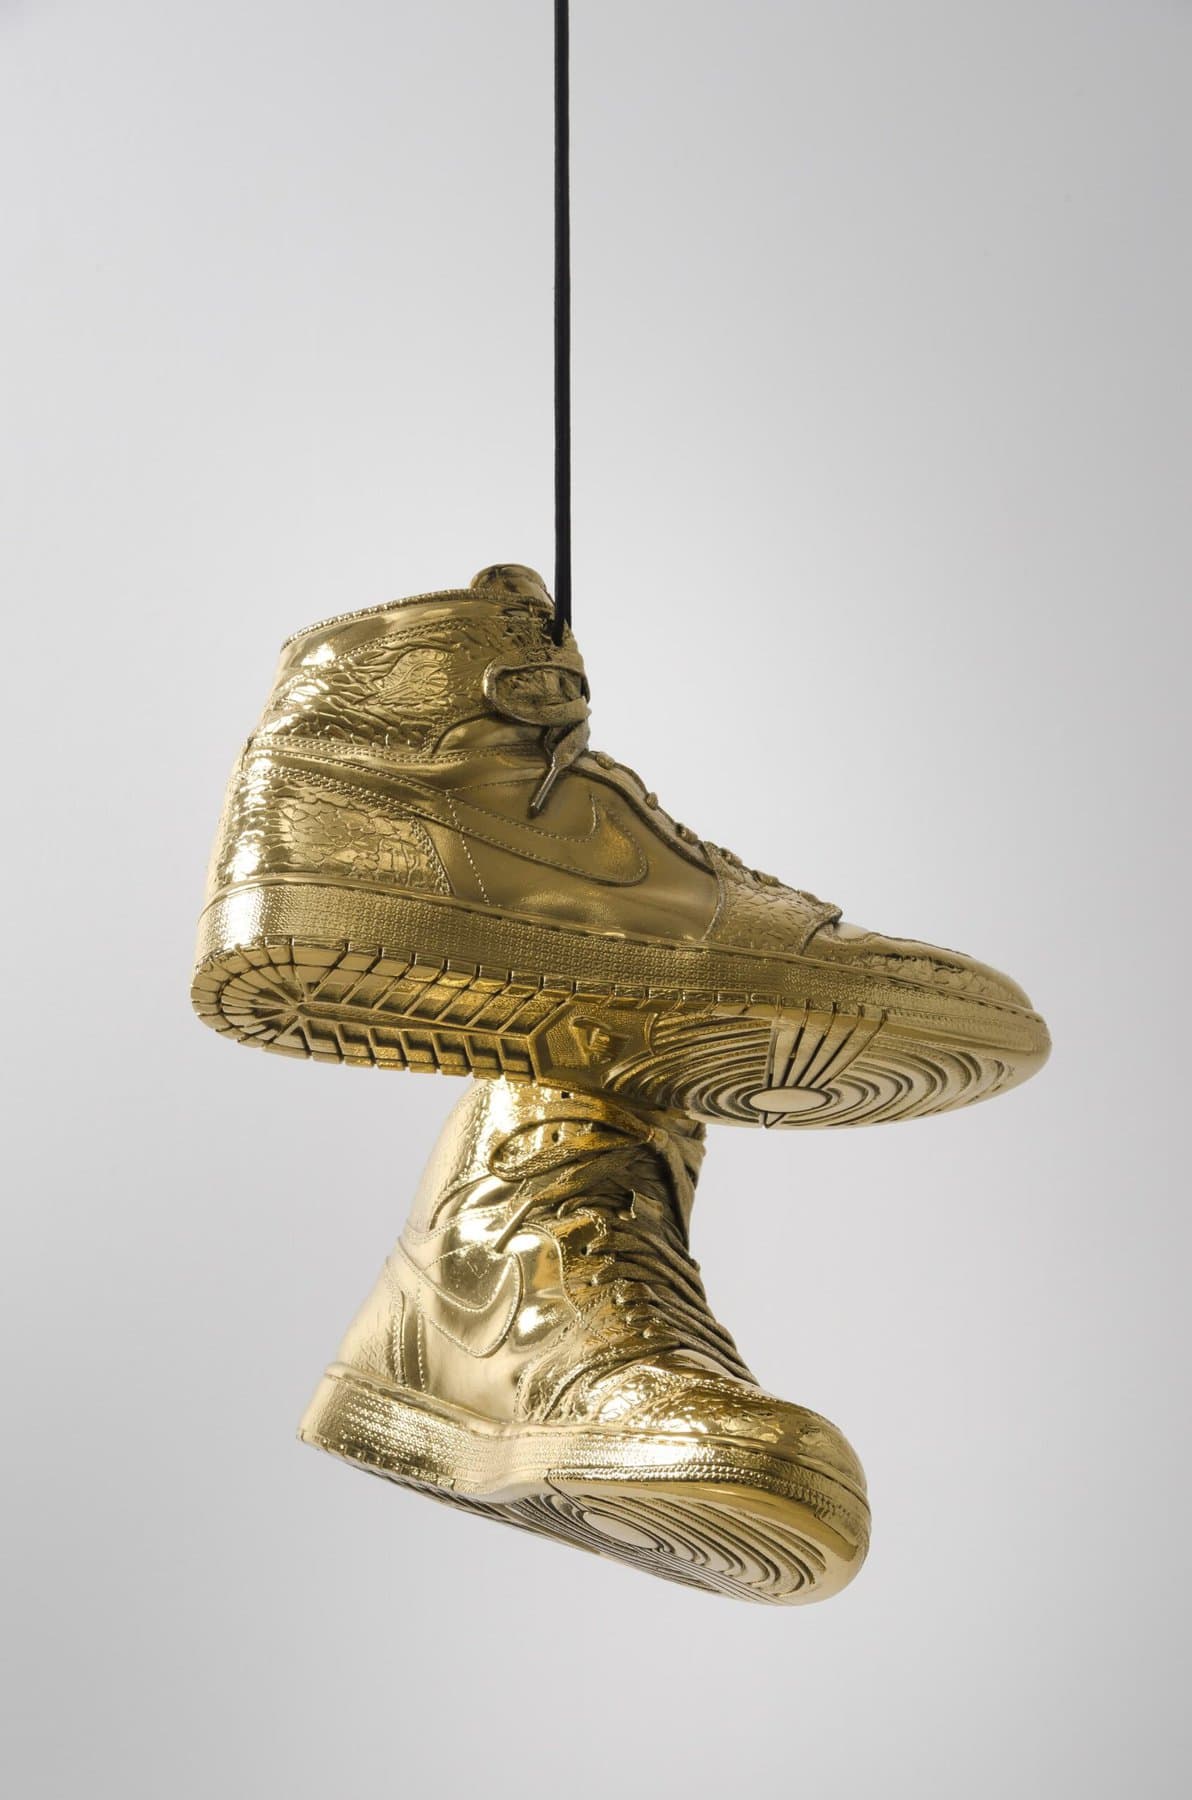 Kendell Carter, "Effigy for a New Normalcy VI (Accepting Greatness), gold-plated sneakers, 2017